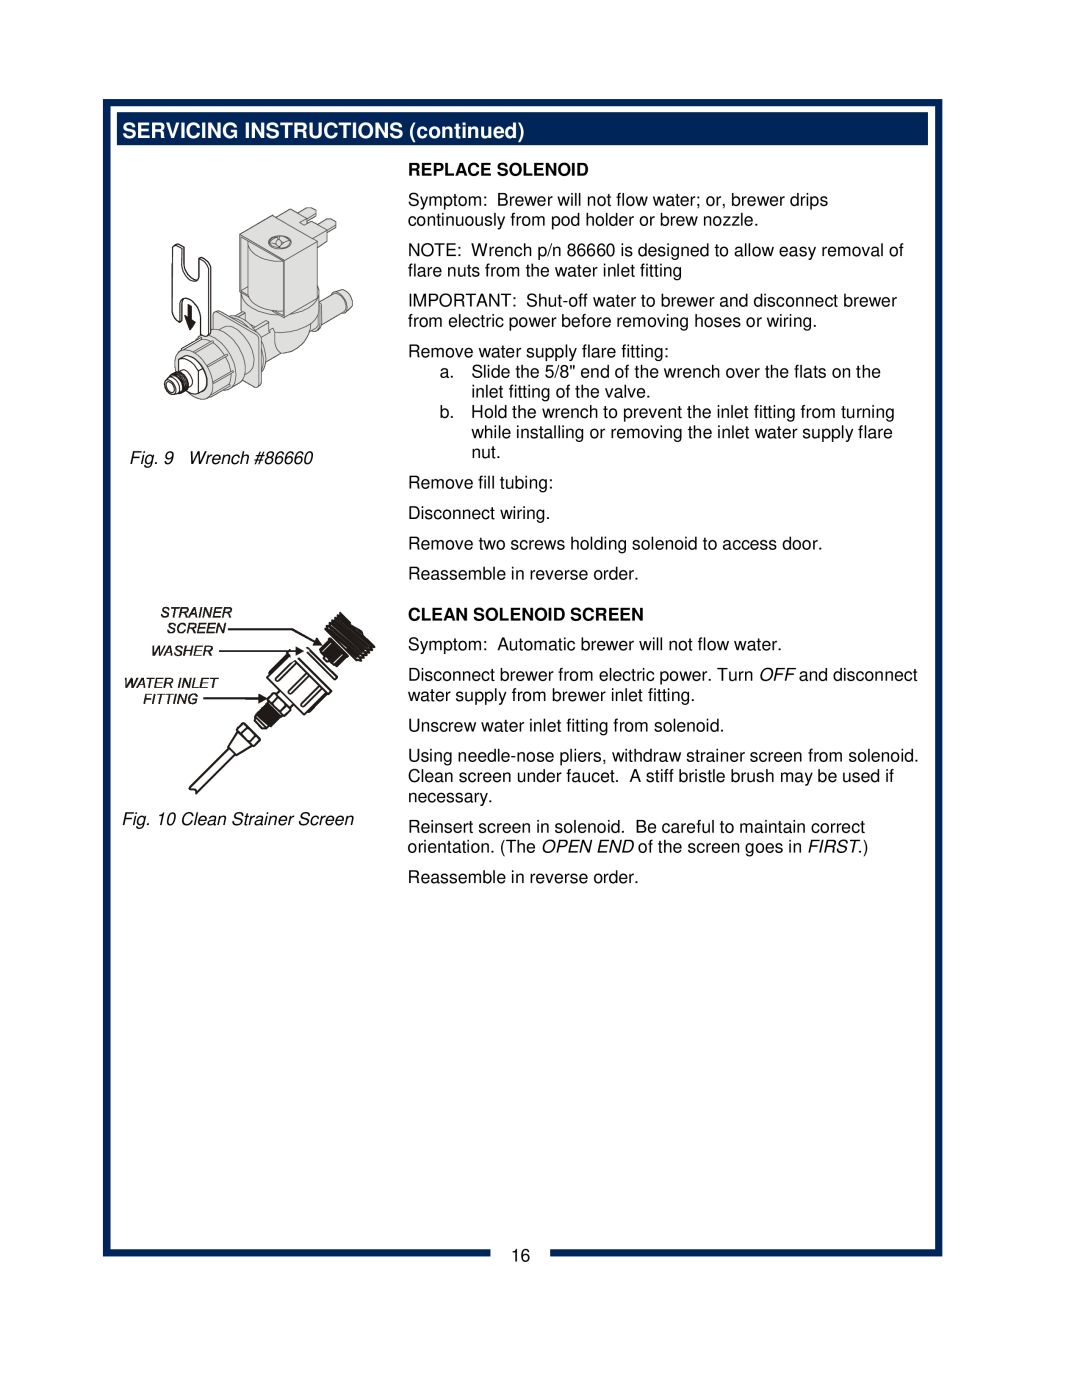 Bloomfield 9600 Single Cup SERVICING INSTRUCTIONS continued, Wrench #86660 Clean Strainer Screen, Replace Solenoid 